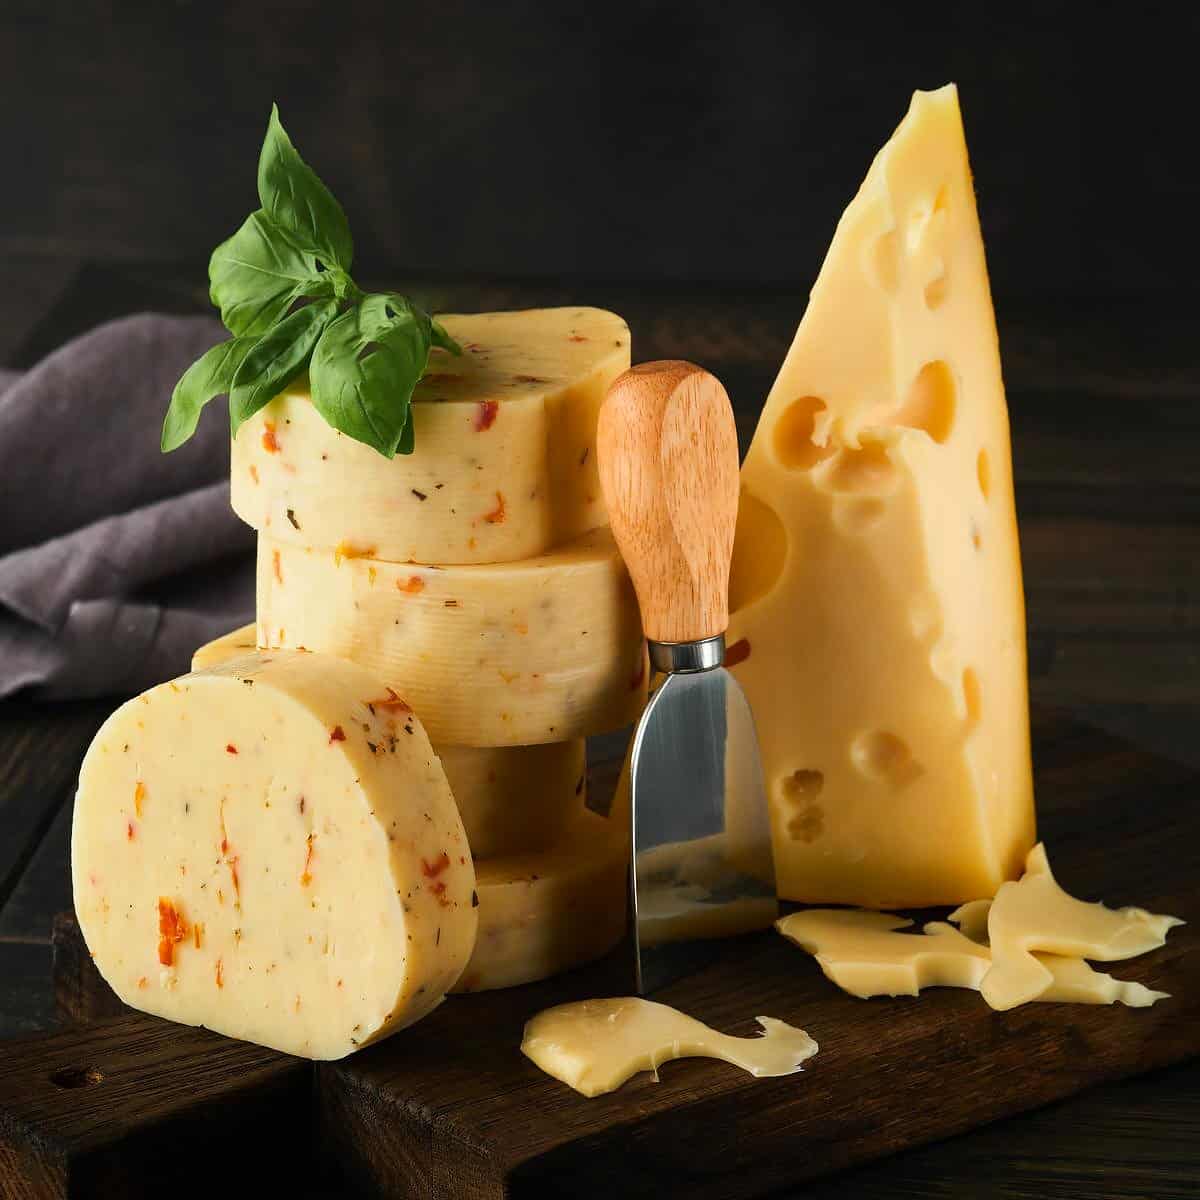 Different type of cheeses on a dark background.